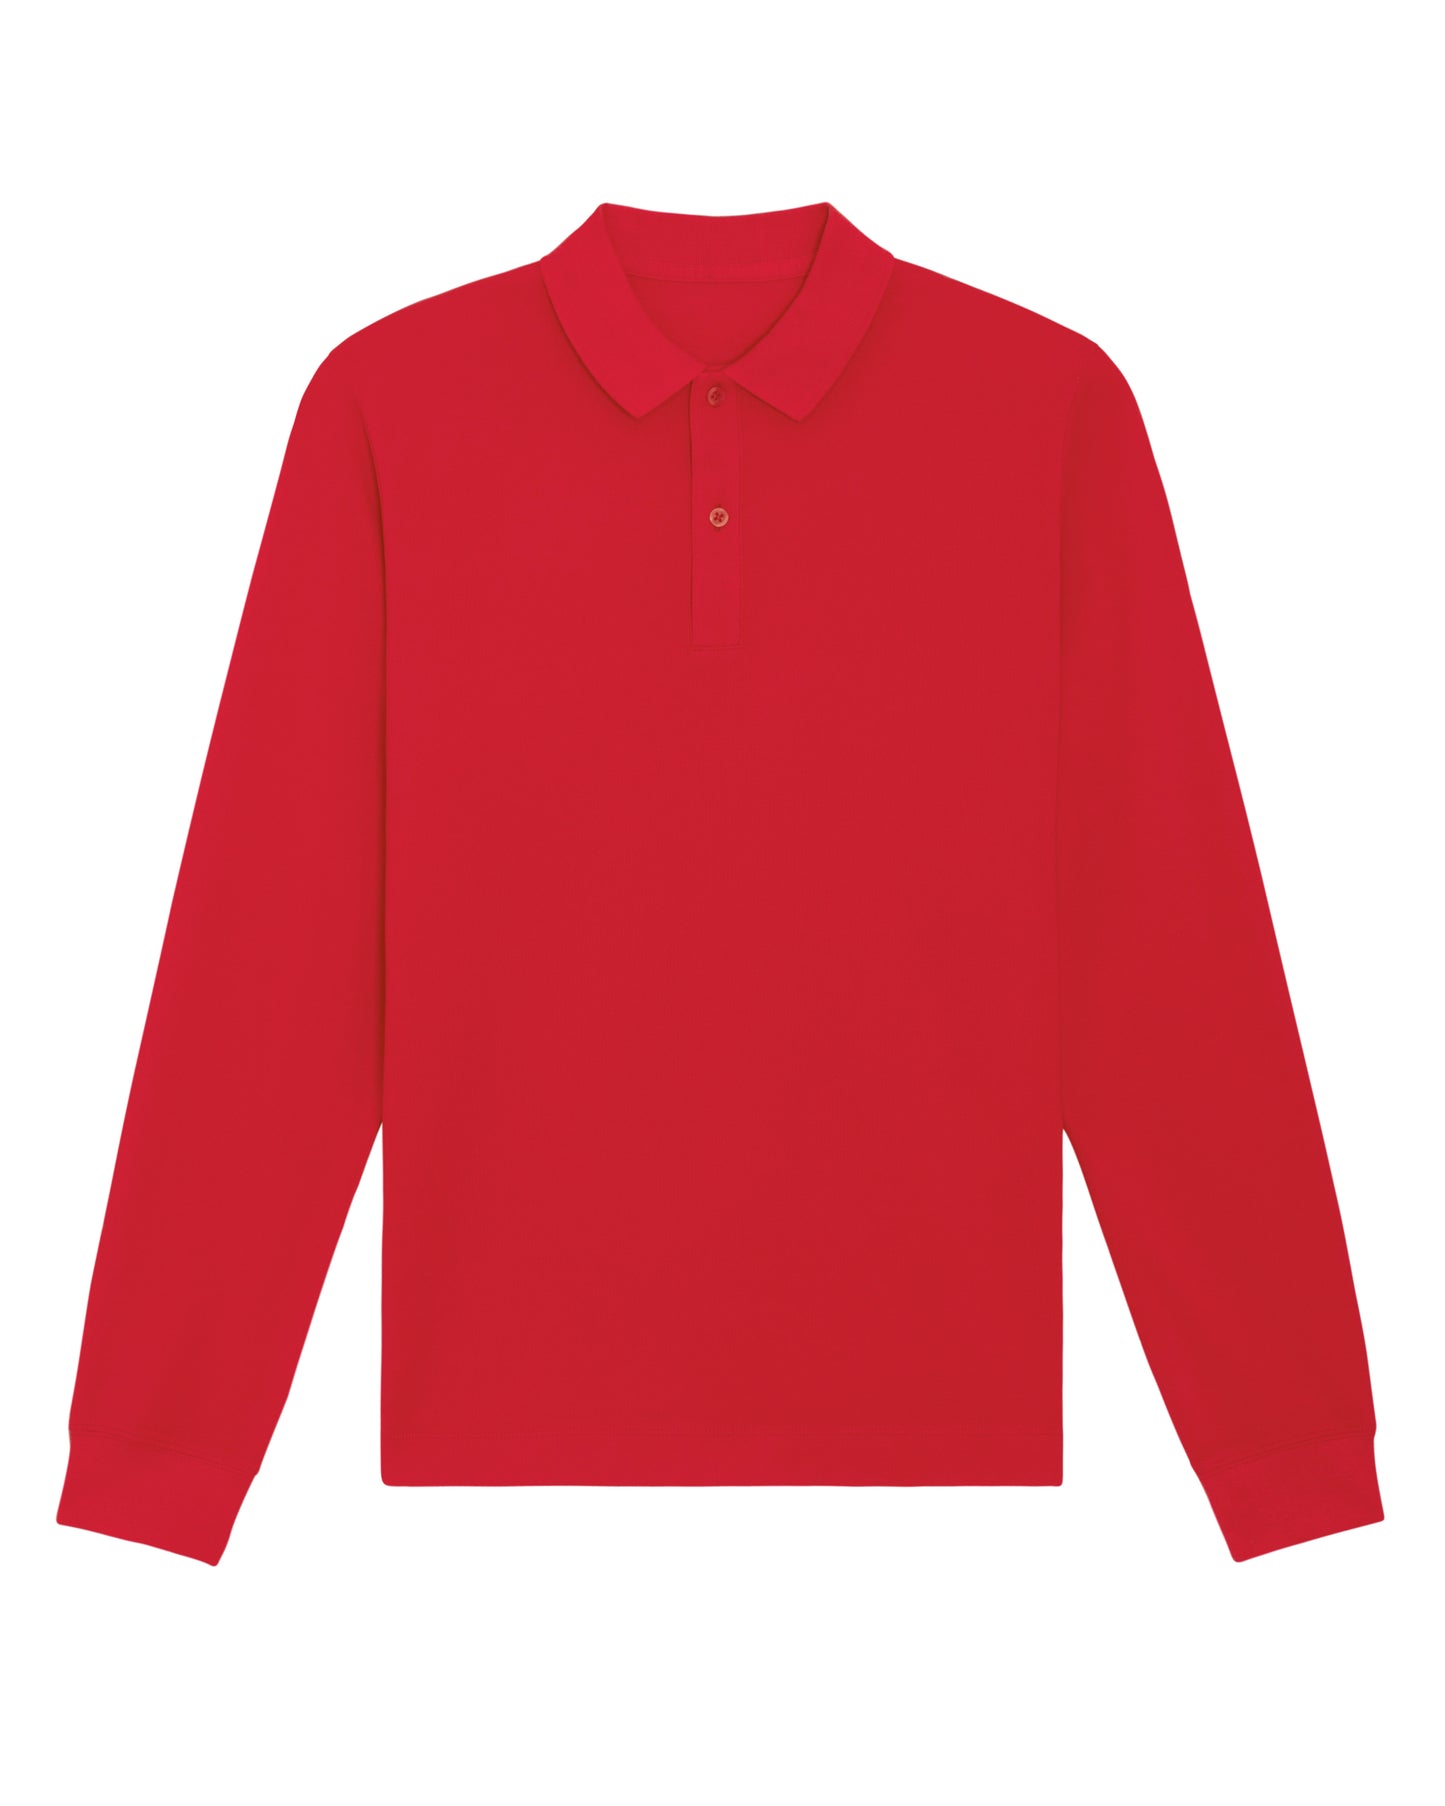 It Fits Outsider - Unisex Regular Fit Polo - Long Sleeves - Red